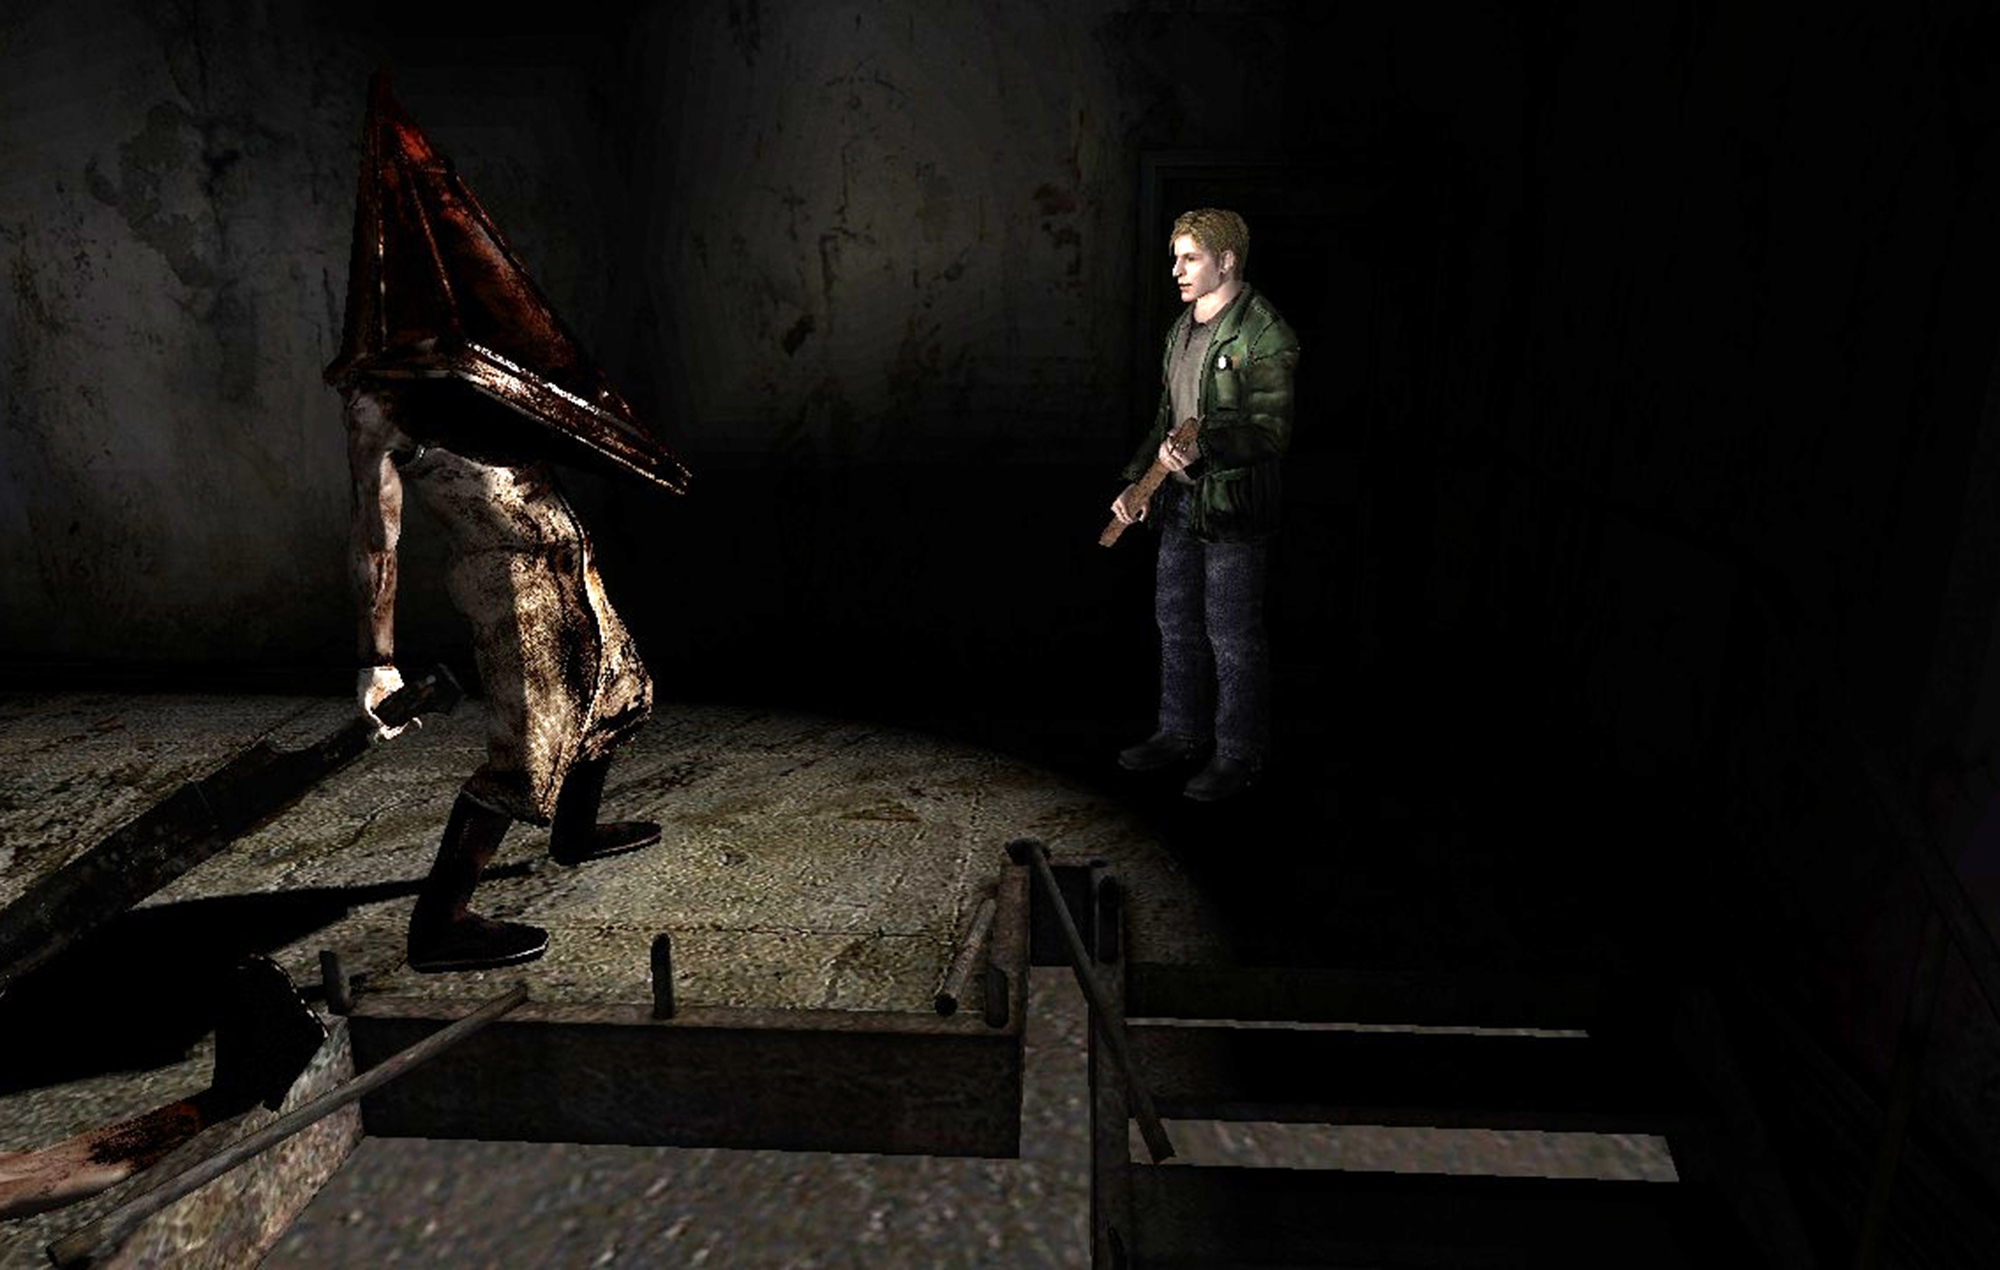 How to Watch the Silent Hill Transmission Live Stream